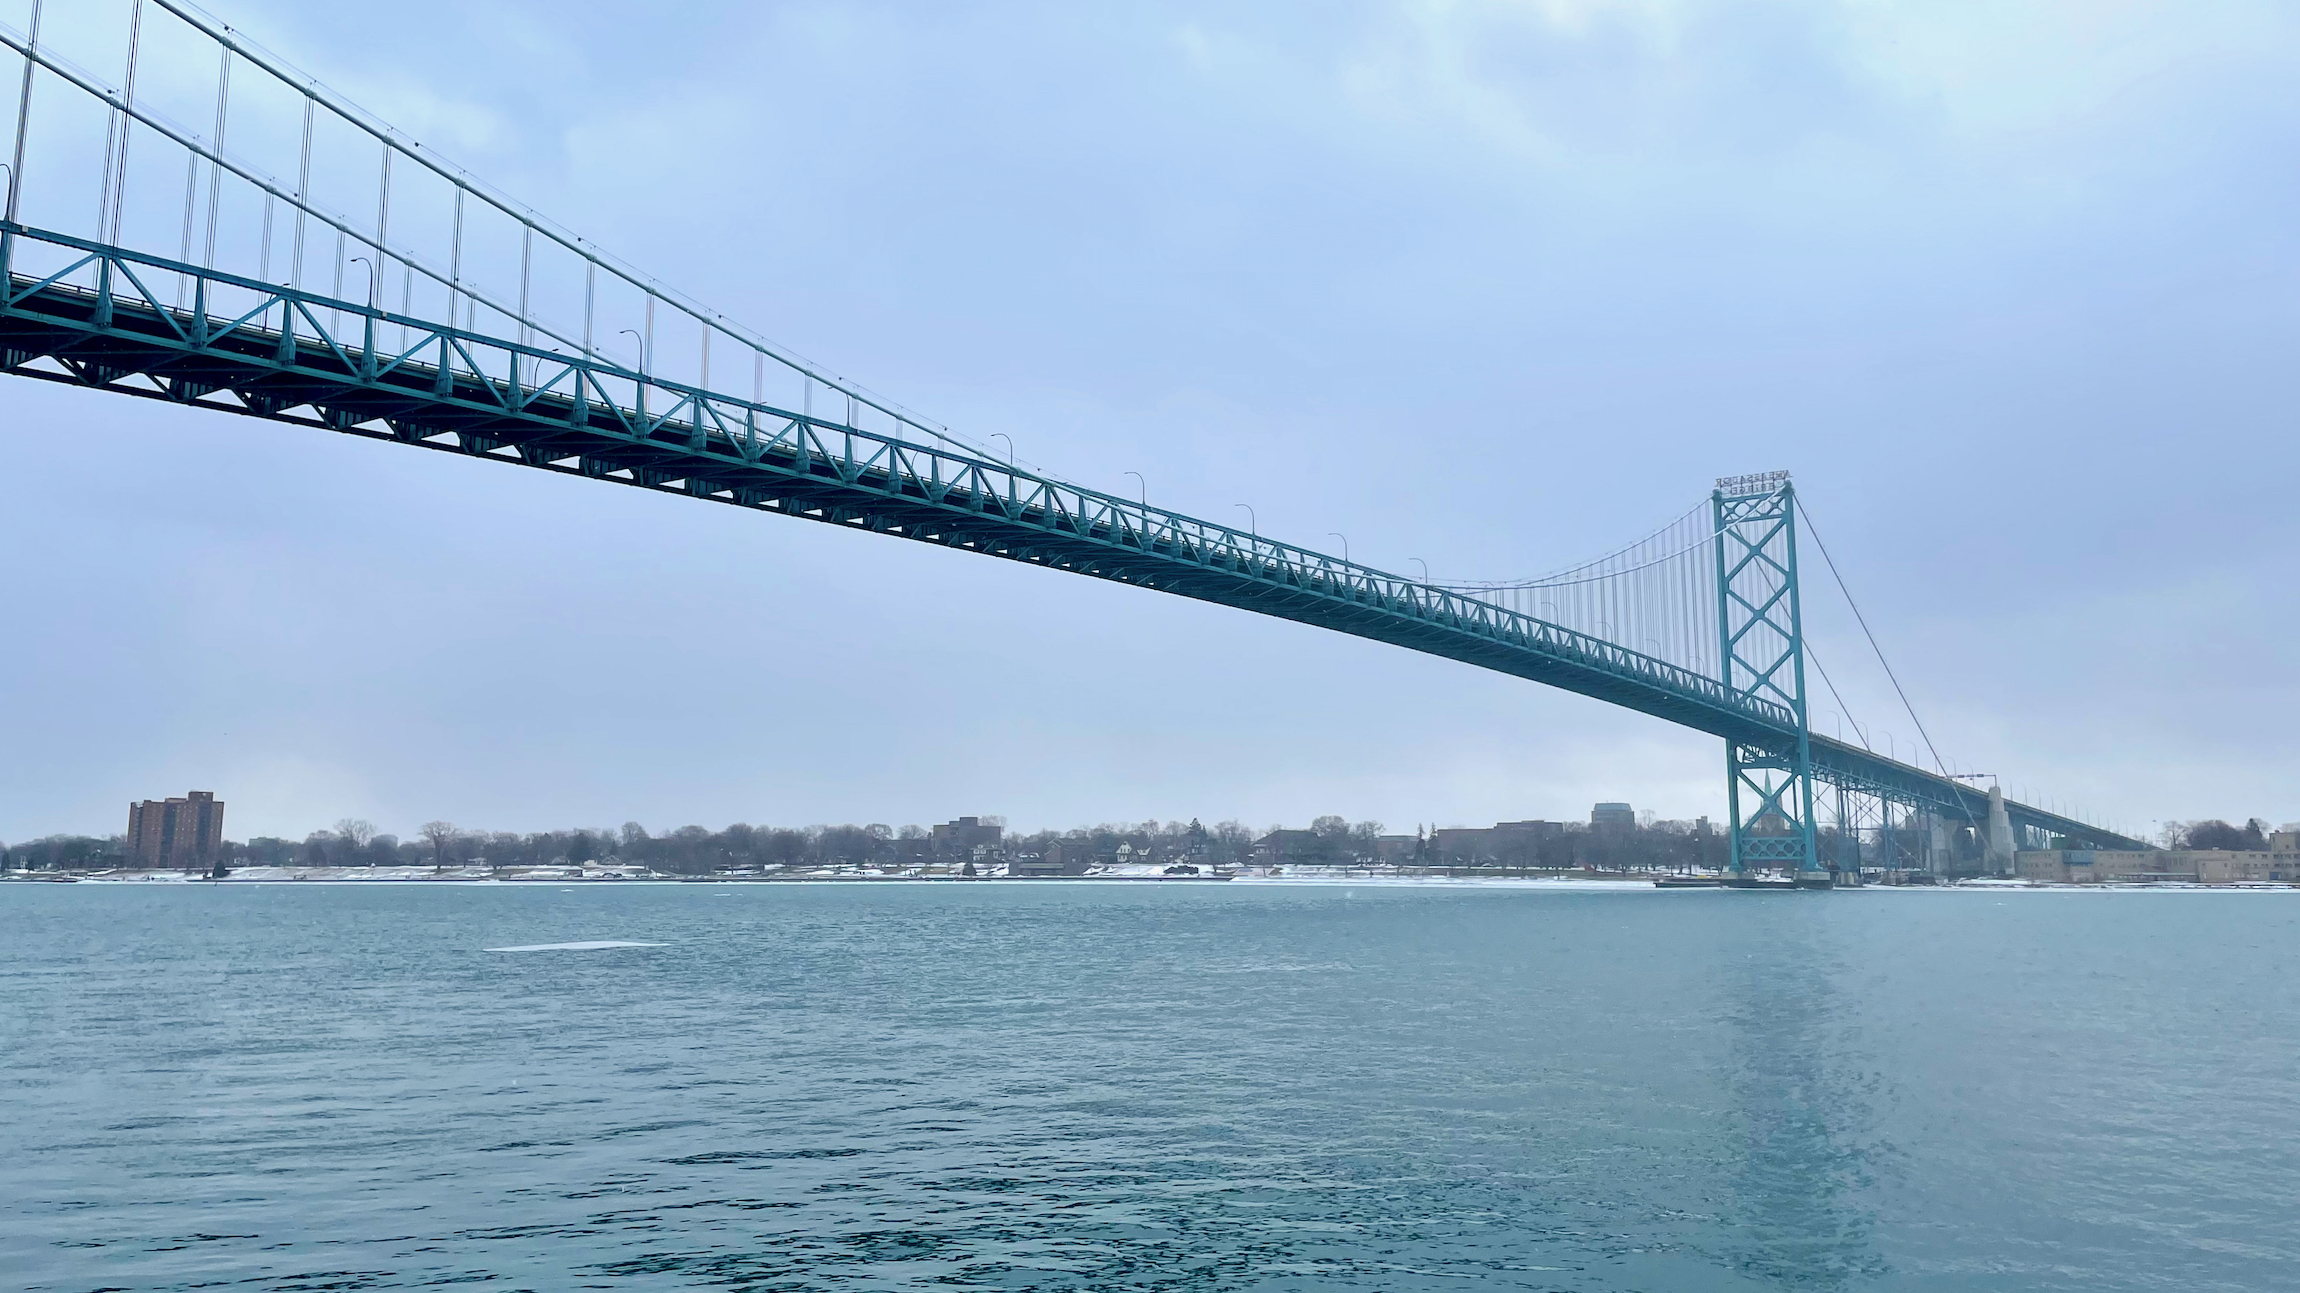 A view of the Ambassador Bridge, a suspension bridge, from below, which has no traffic on it because of a protest